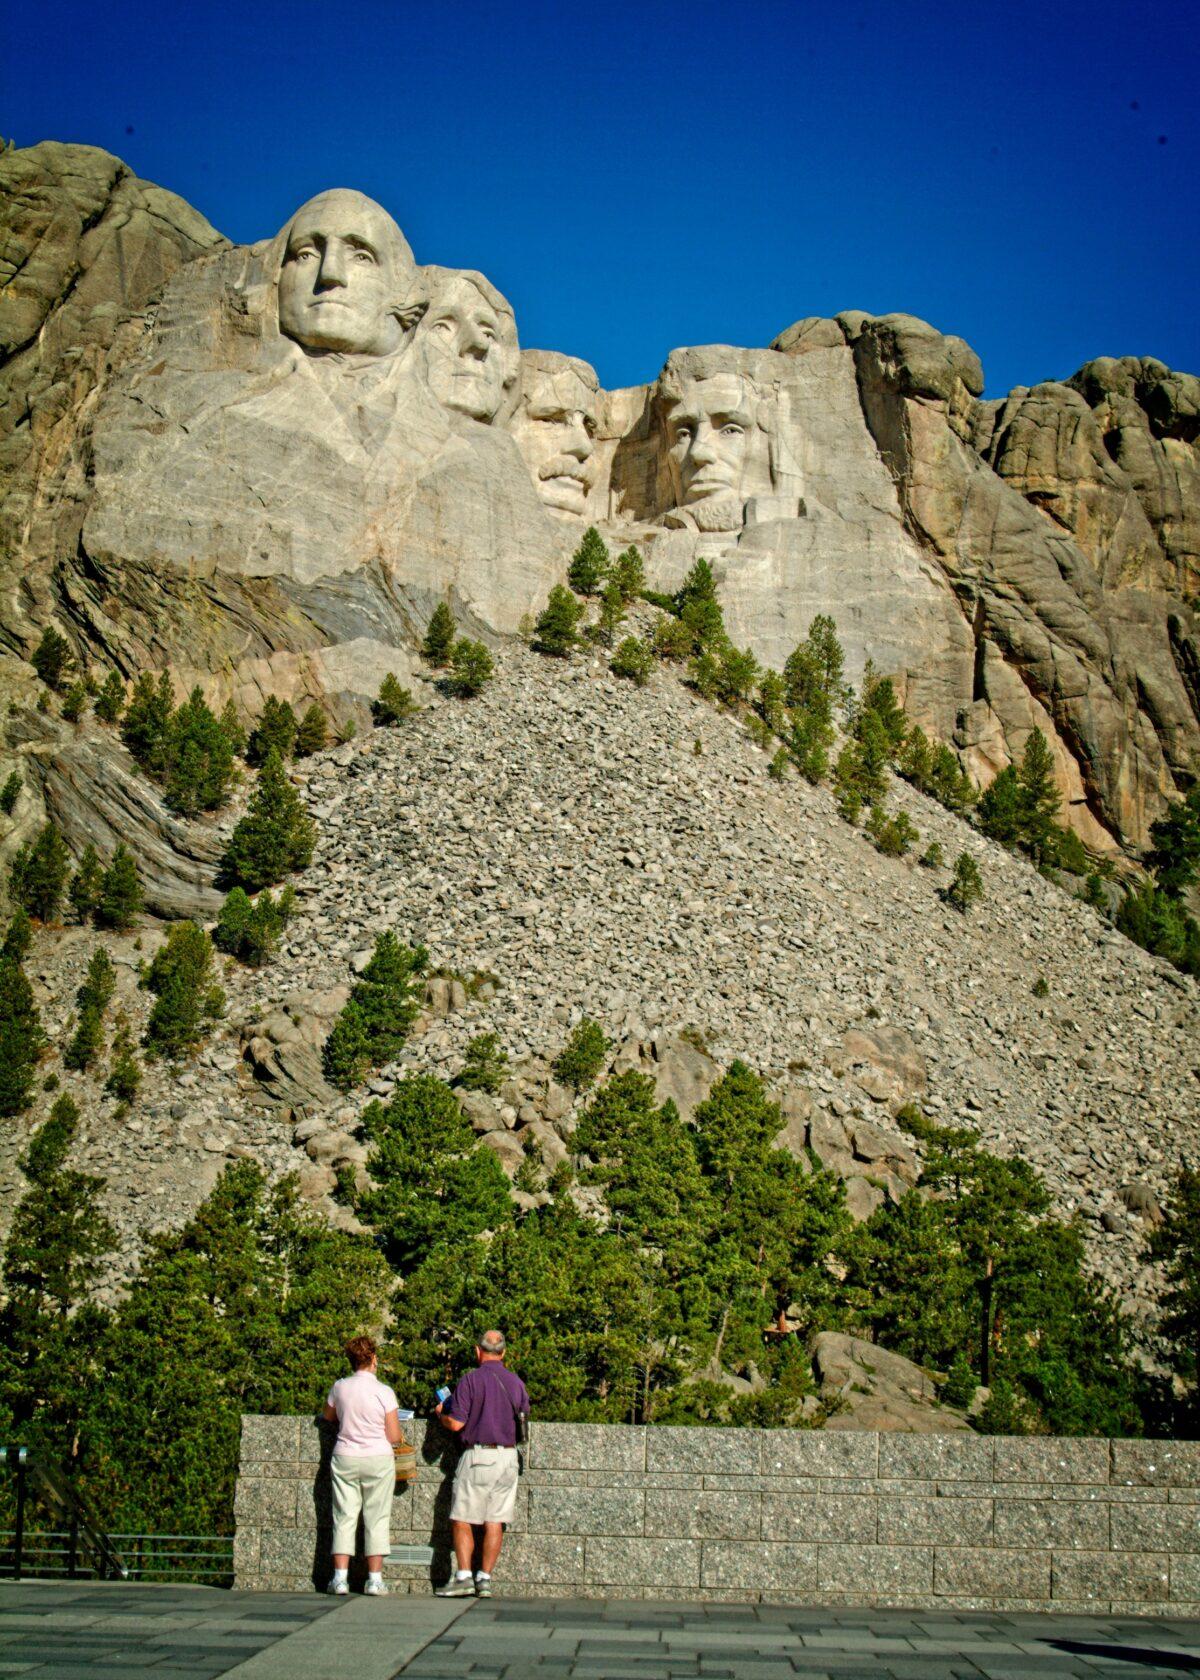 The sheer size of Mount Rushmore National Memorial overwhelms visitors when they stand at the viewing platform and look up at the images of the four great American leaders. (Copyright Fred J. Eckert)